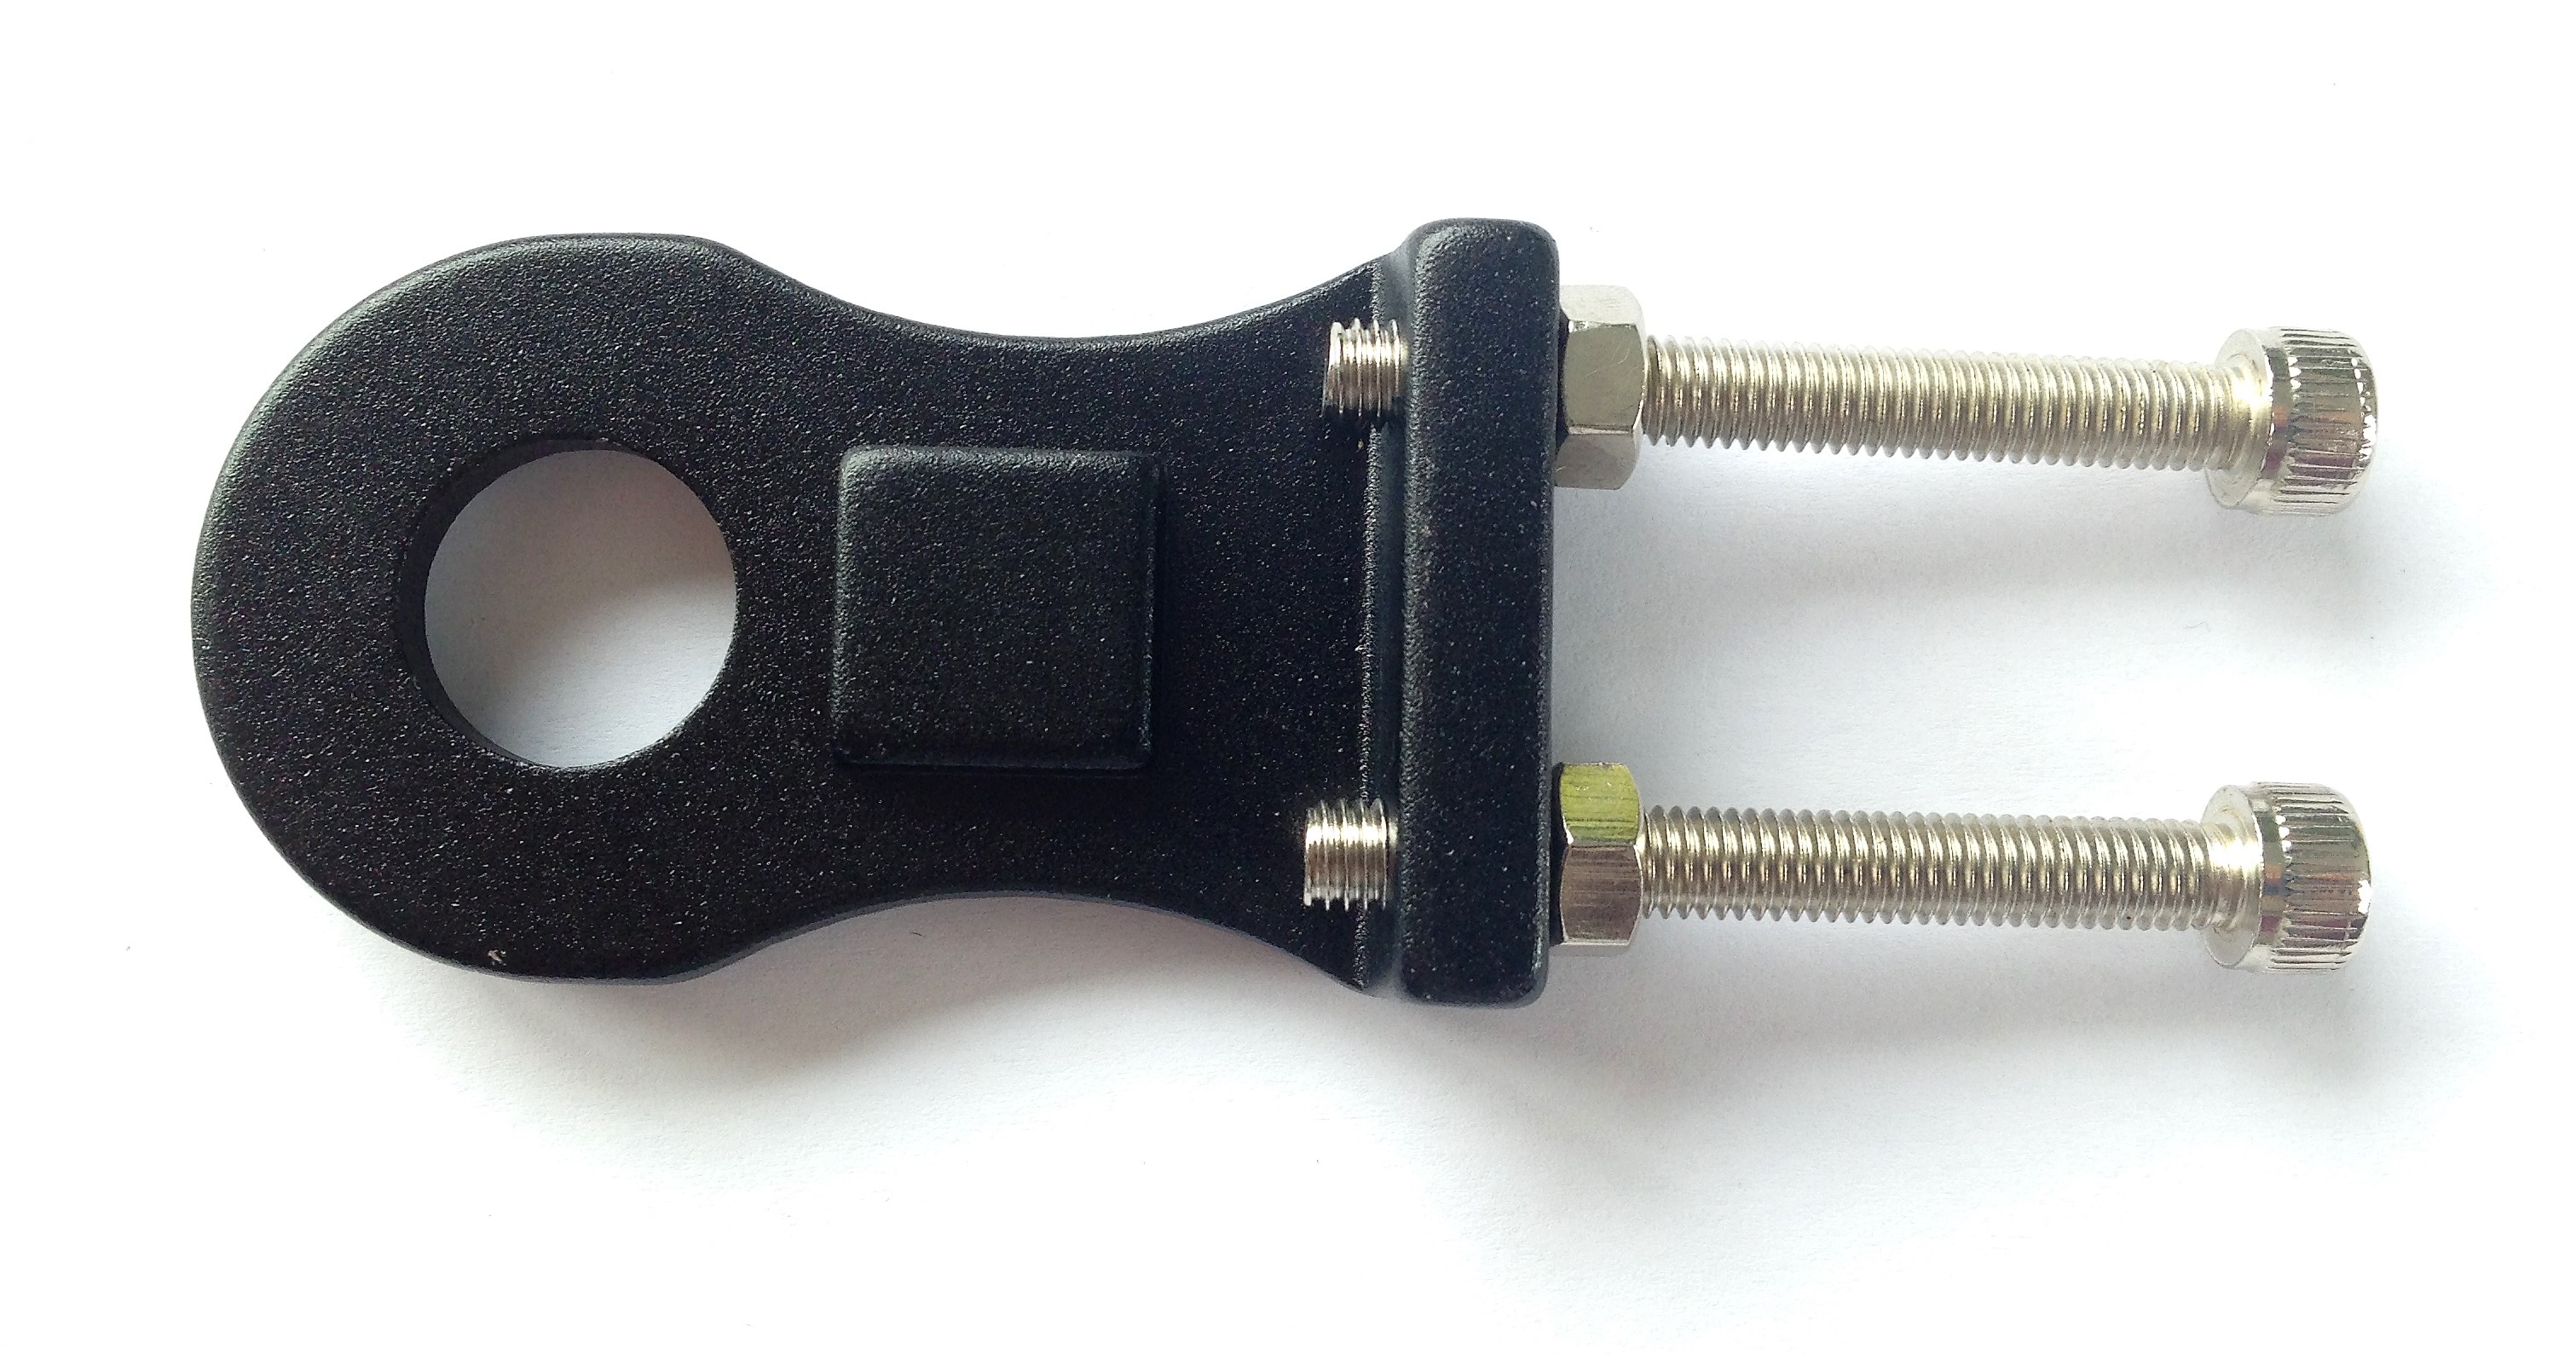 Chain tensioner 14 mm axle for 1/2"